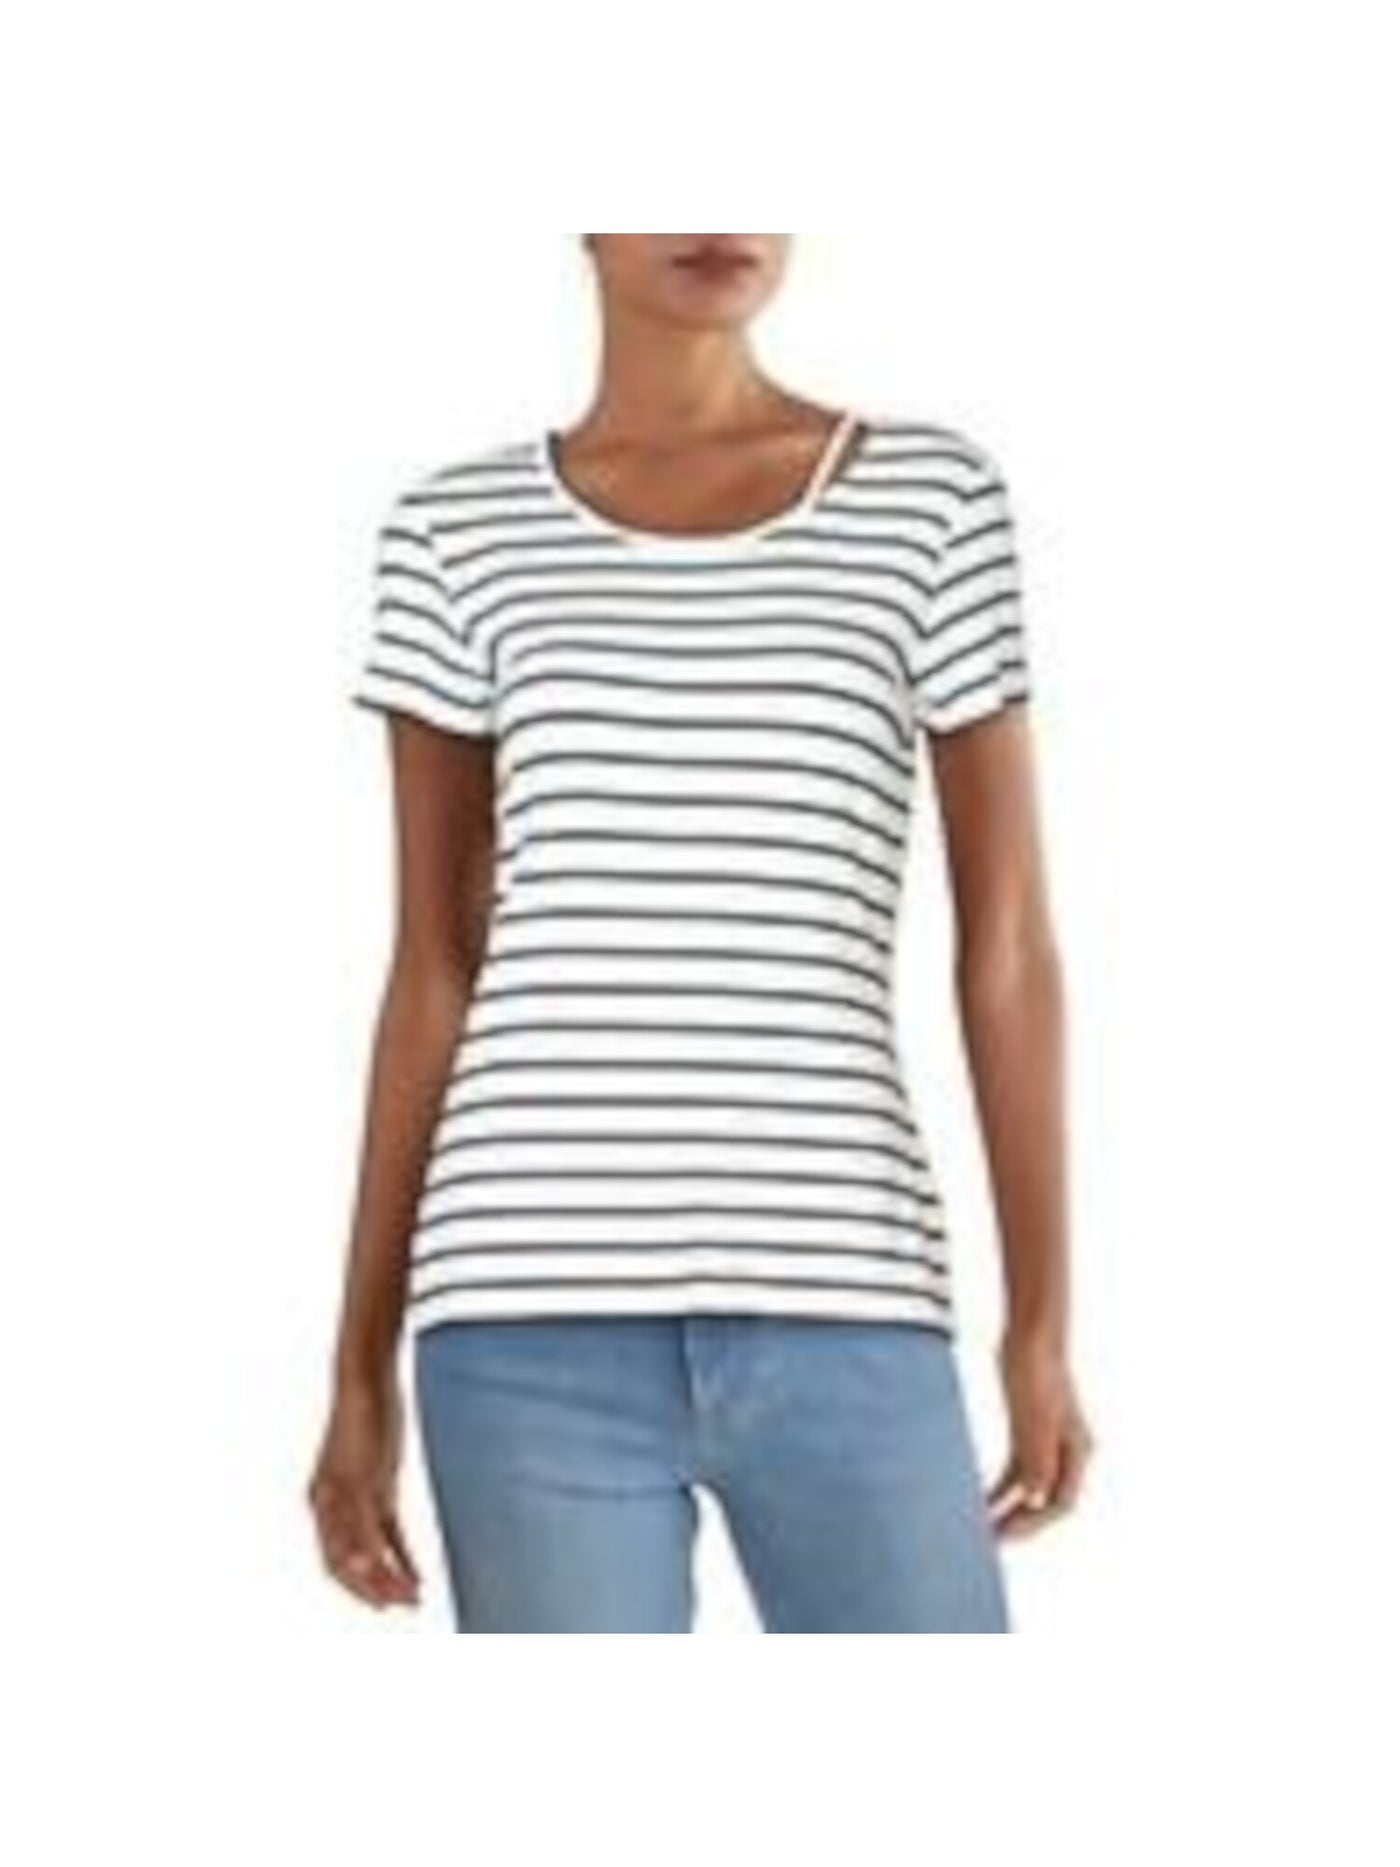 BAILEY44 Womens White Stretch Cut Out Along Neckline Striped Short Sleeve Scoop Neck T-Shirt S